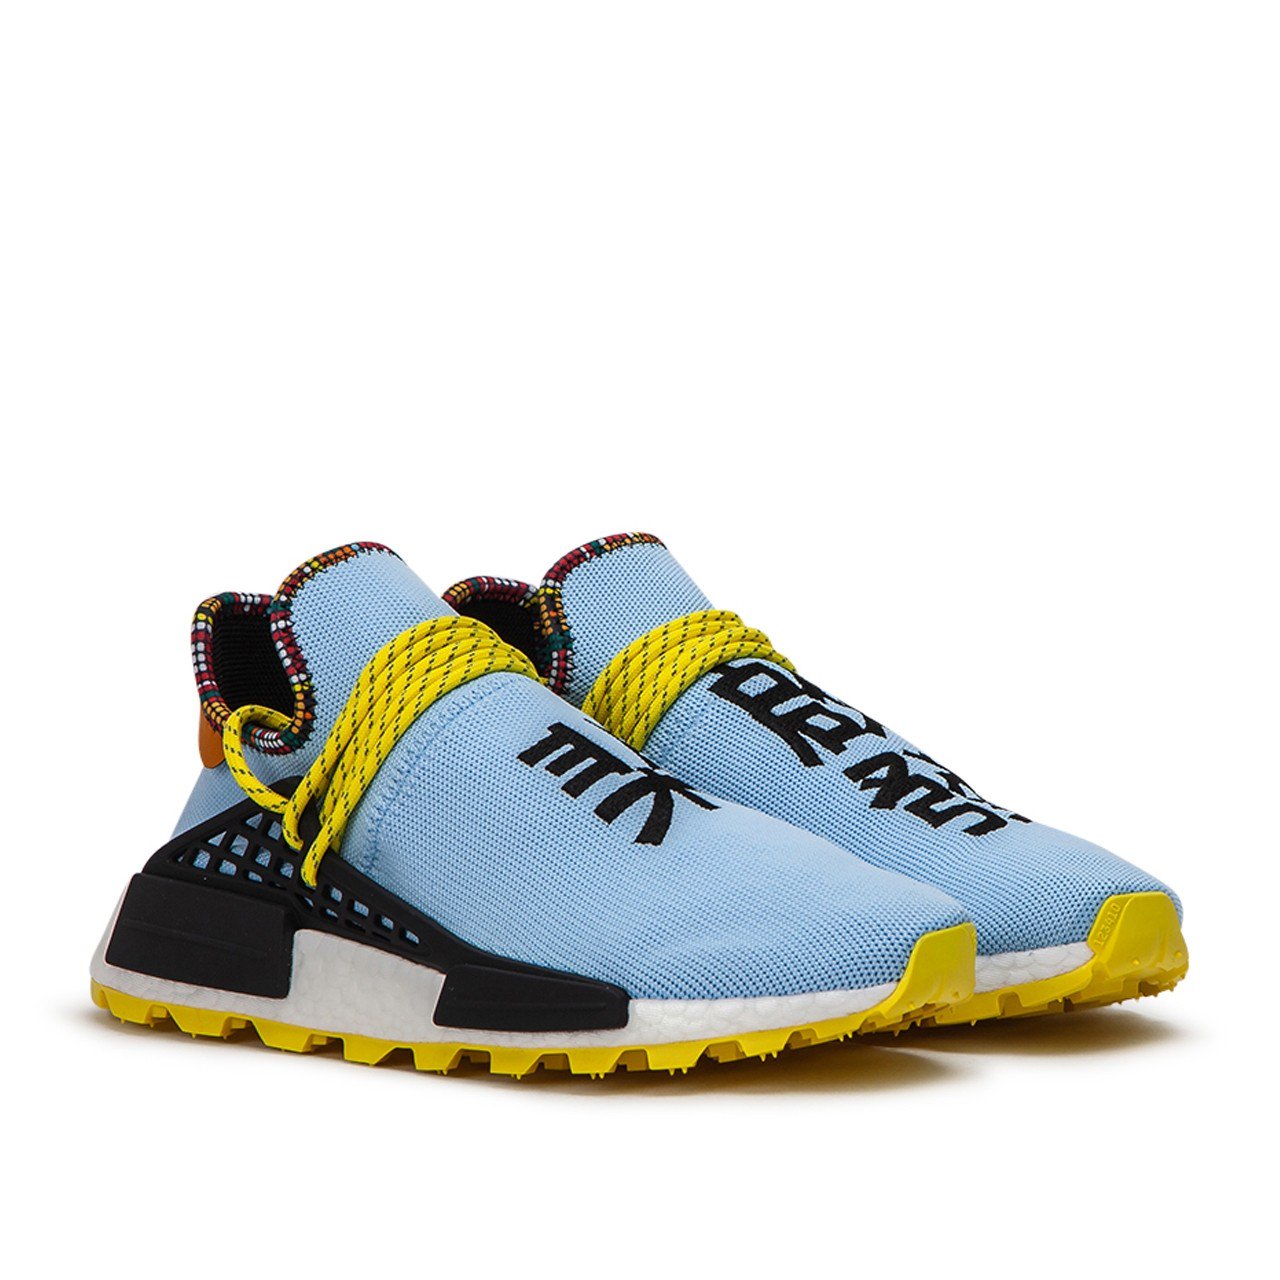 adidas-Solar-HU-NMD-nam-chinh-hang-EE7581-king-shoes-sneaker-authentic-tphcm-7.jpg